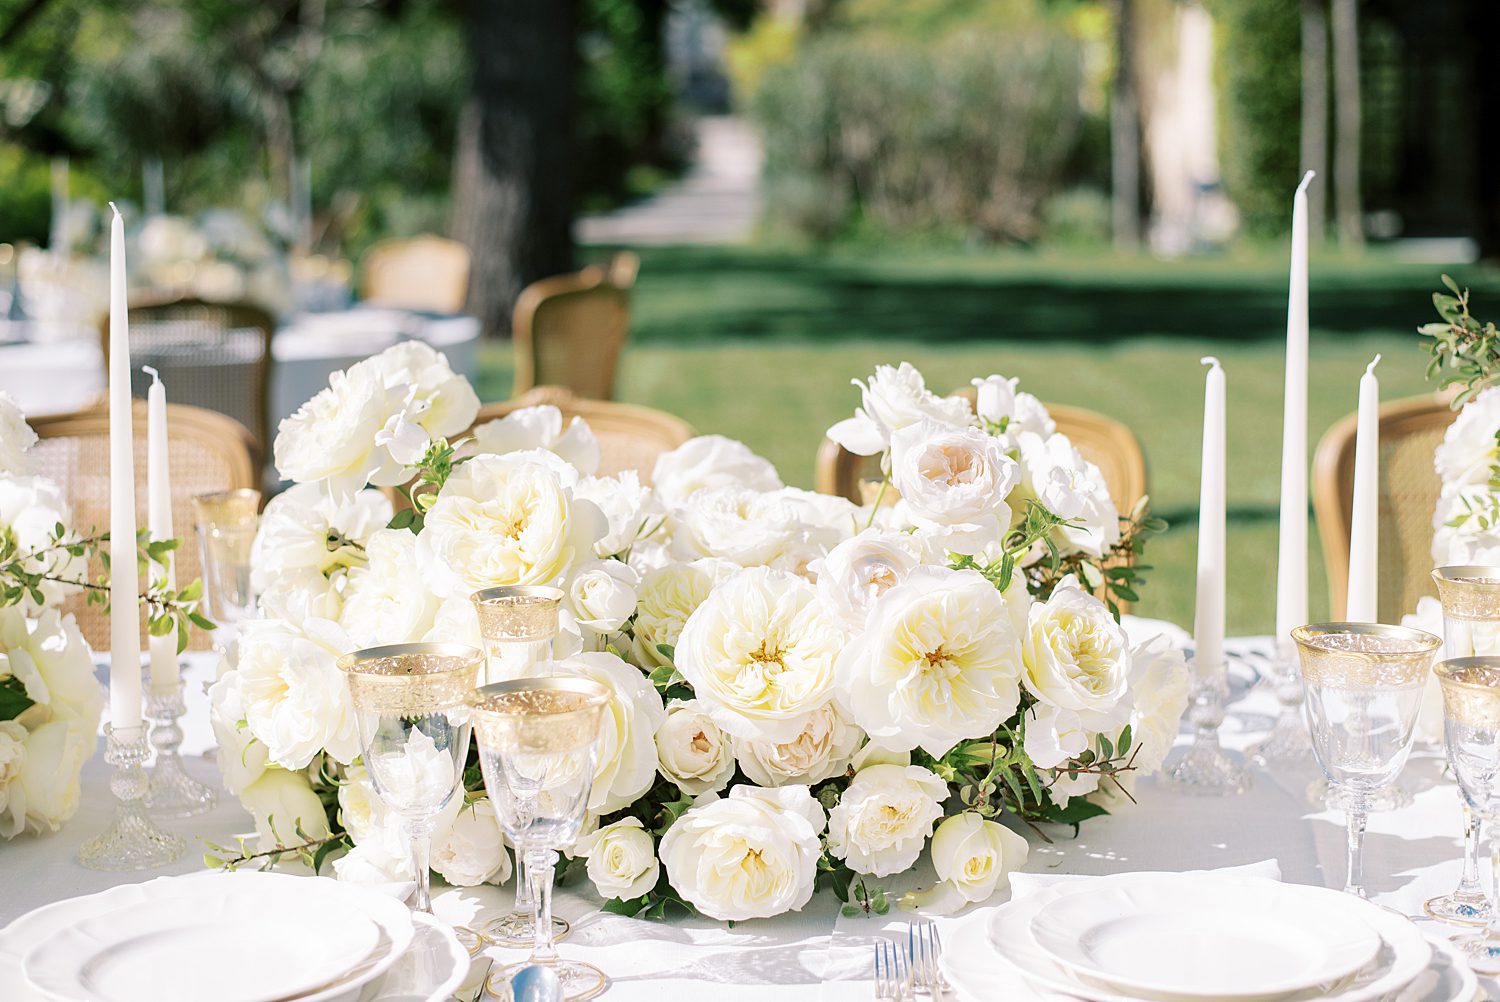 wedding reception centerpieces with white roses and flowers 